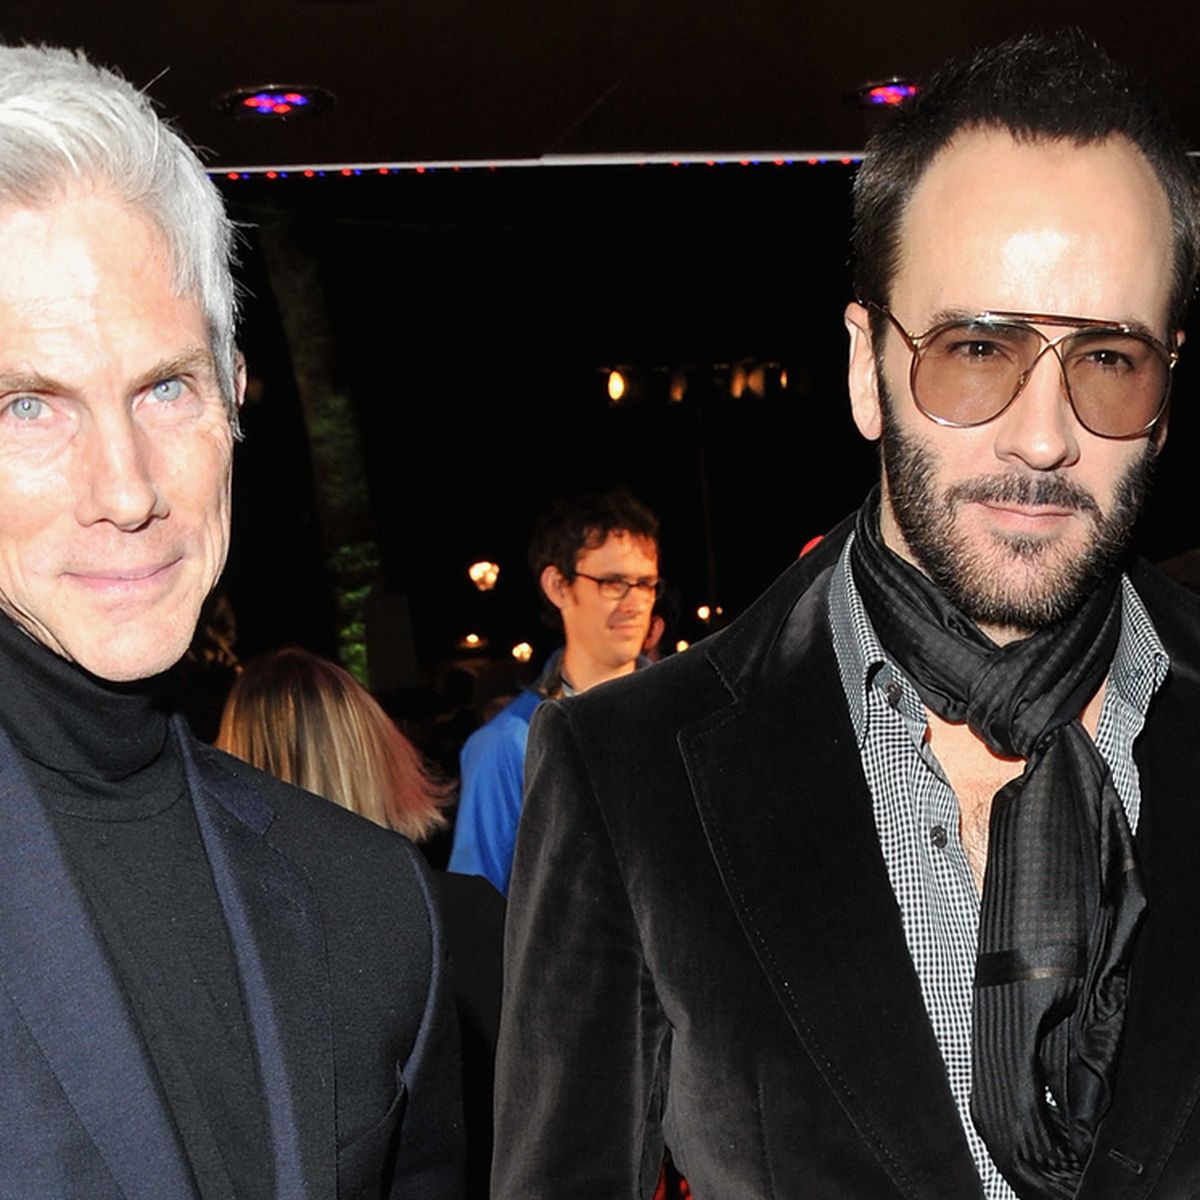 Tom Ford's husband Richard Buckley dies aged 72 from 'natural